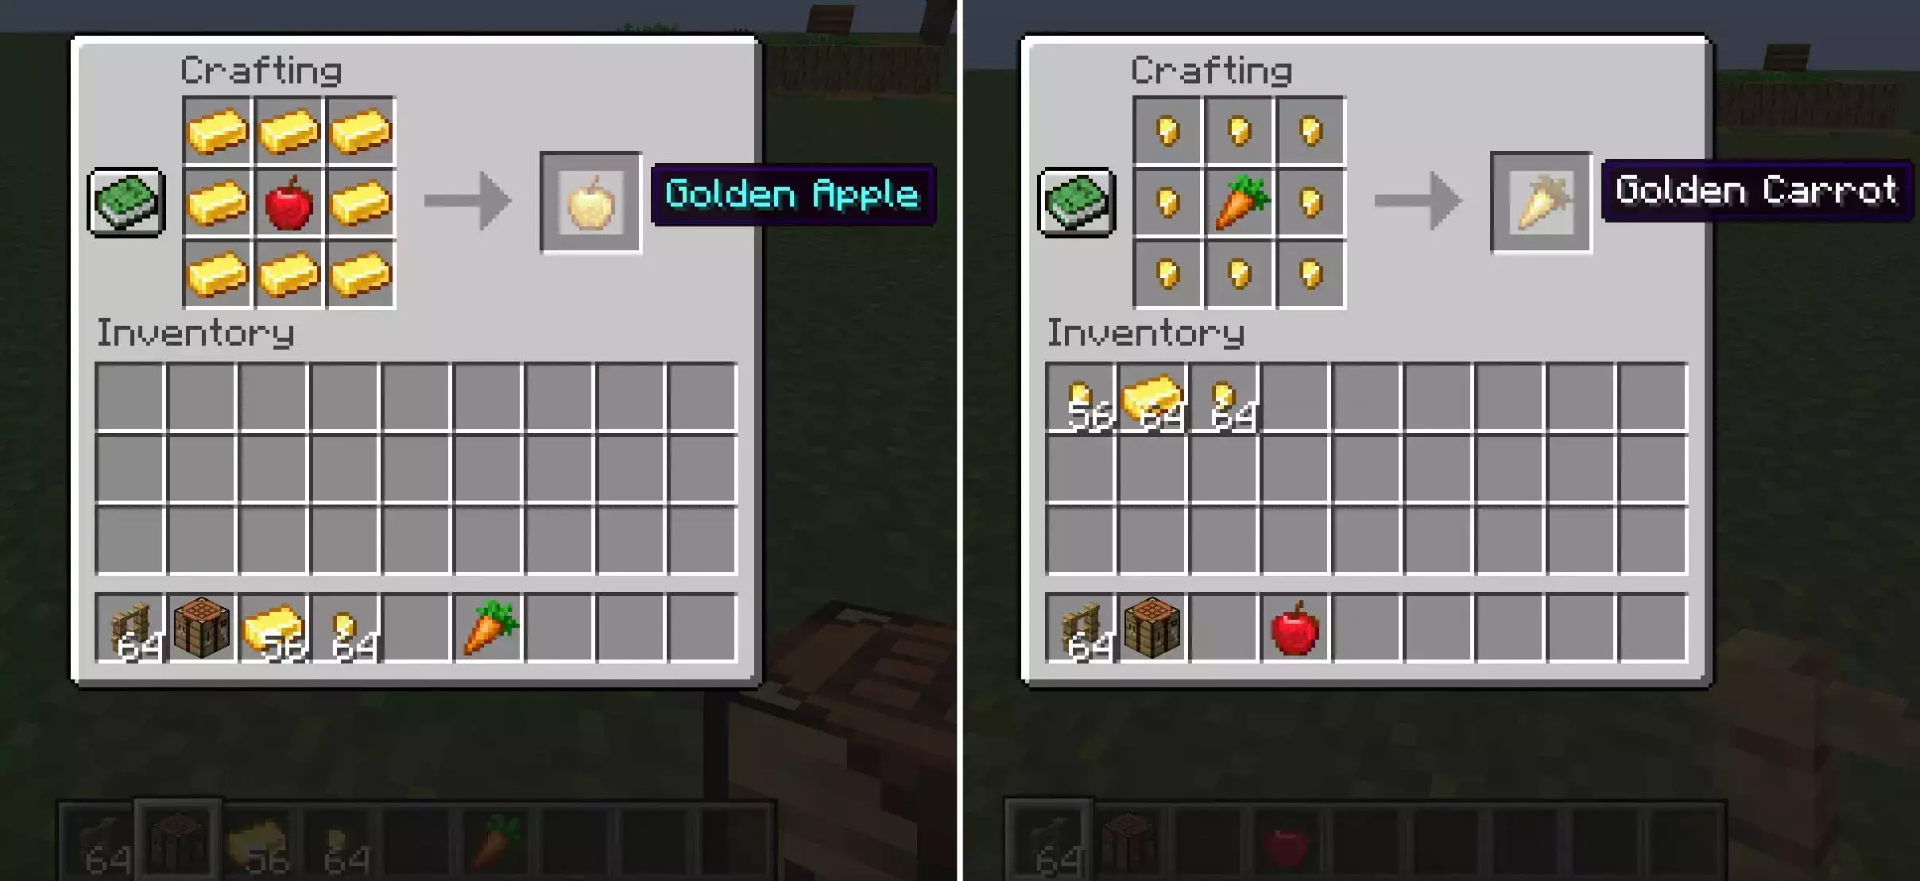 Make Golden Apples and Carrots in Minecraft